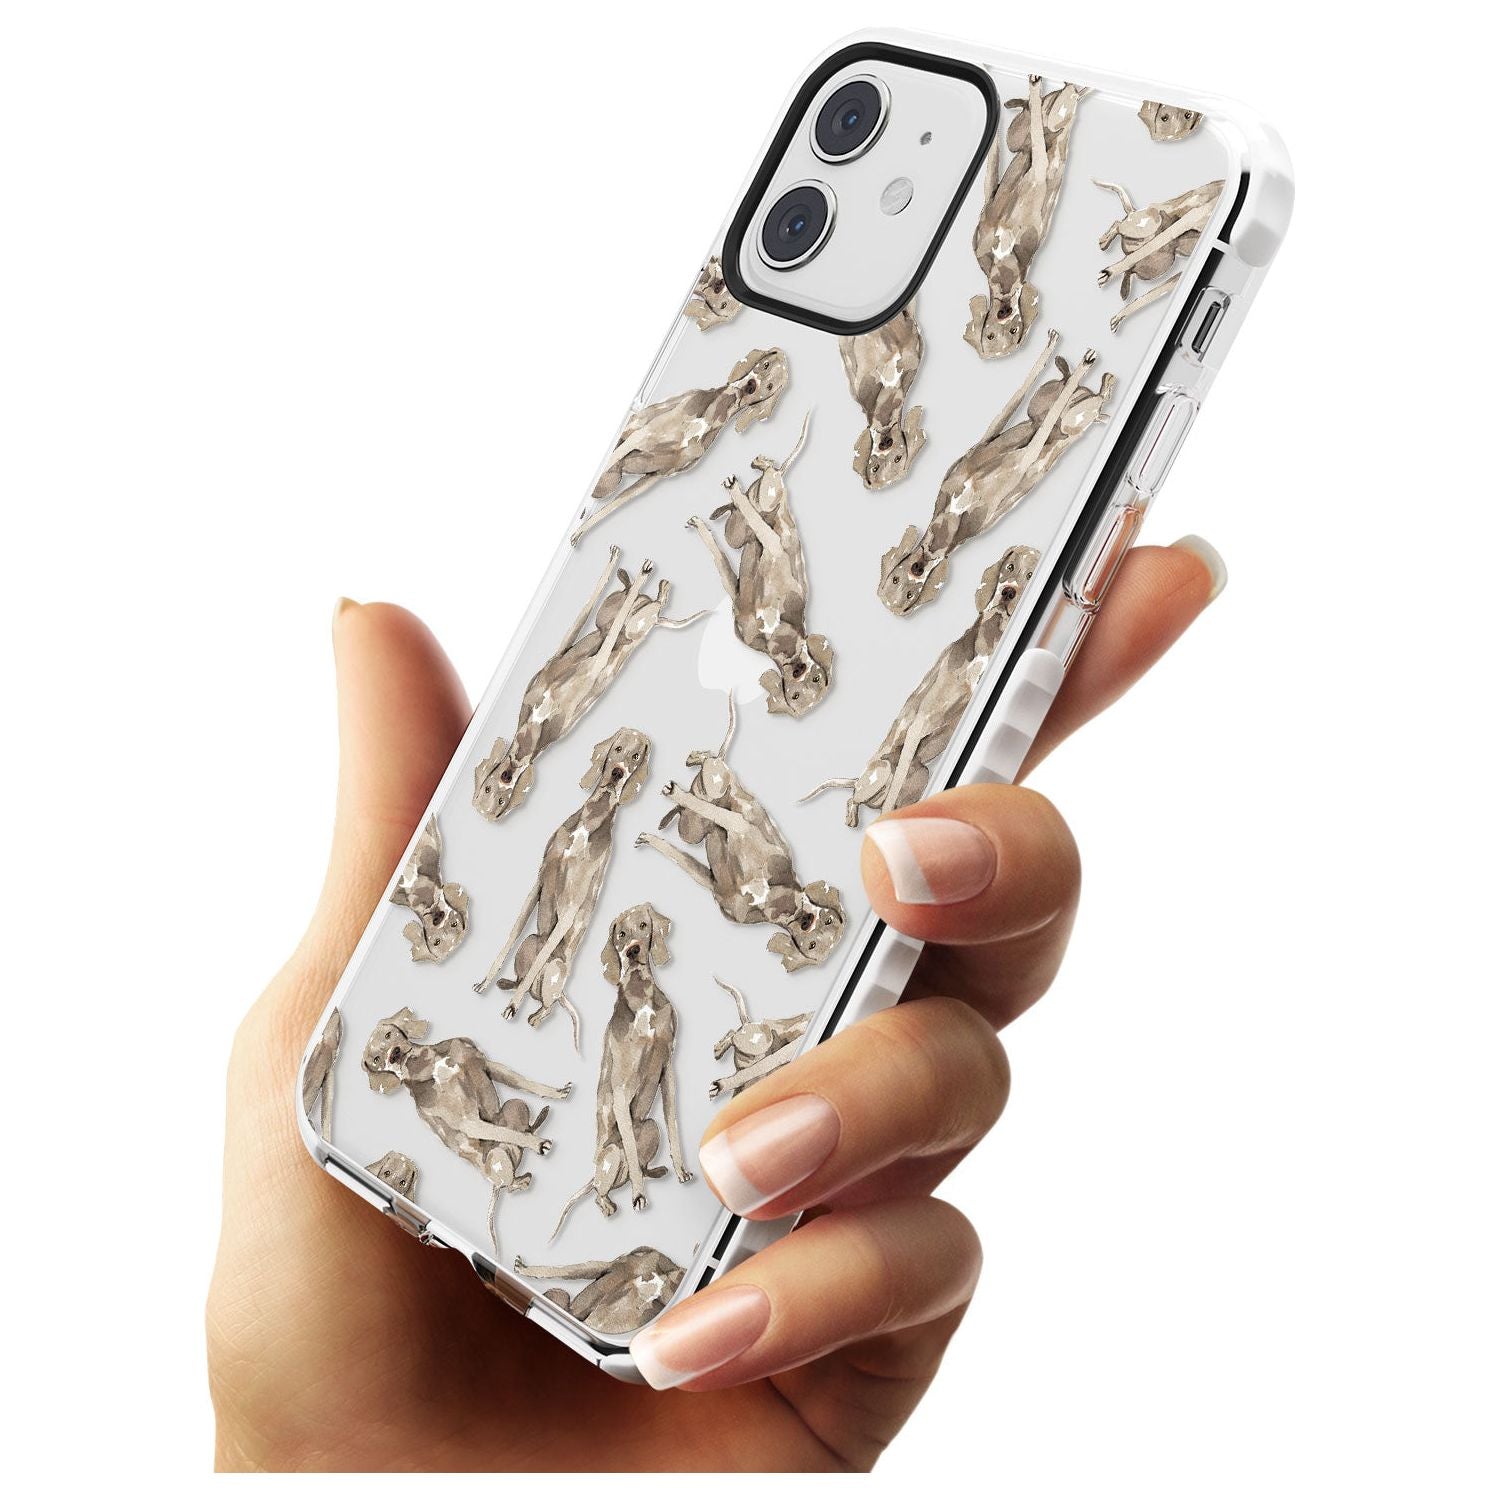 Weimaraner Watercolour Dog Pattern Impact Phone Case for iPhone 11